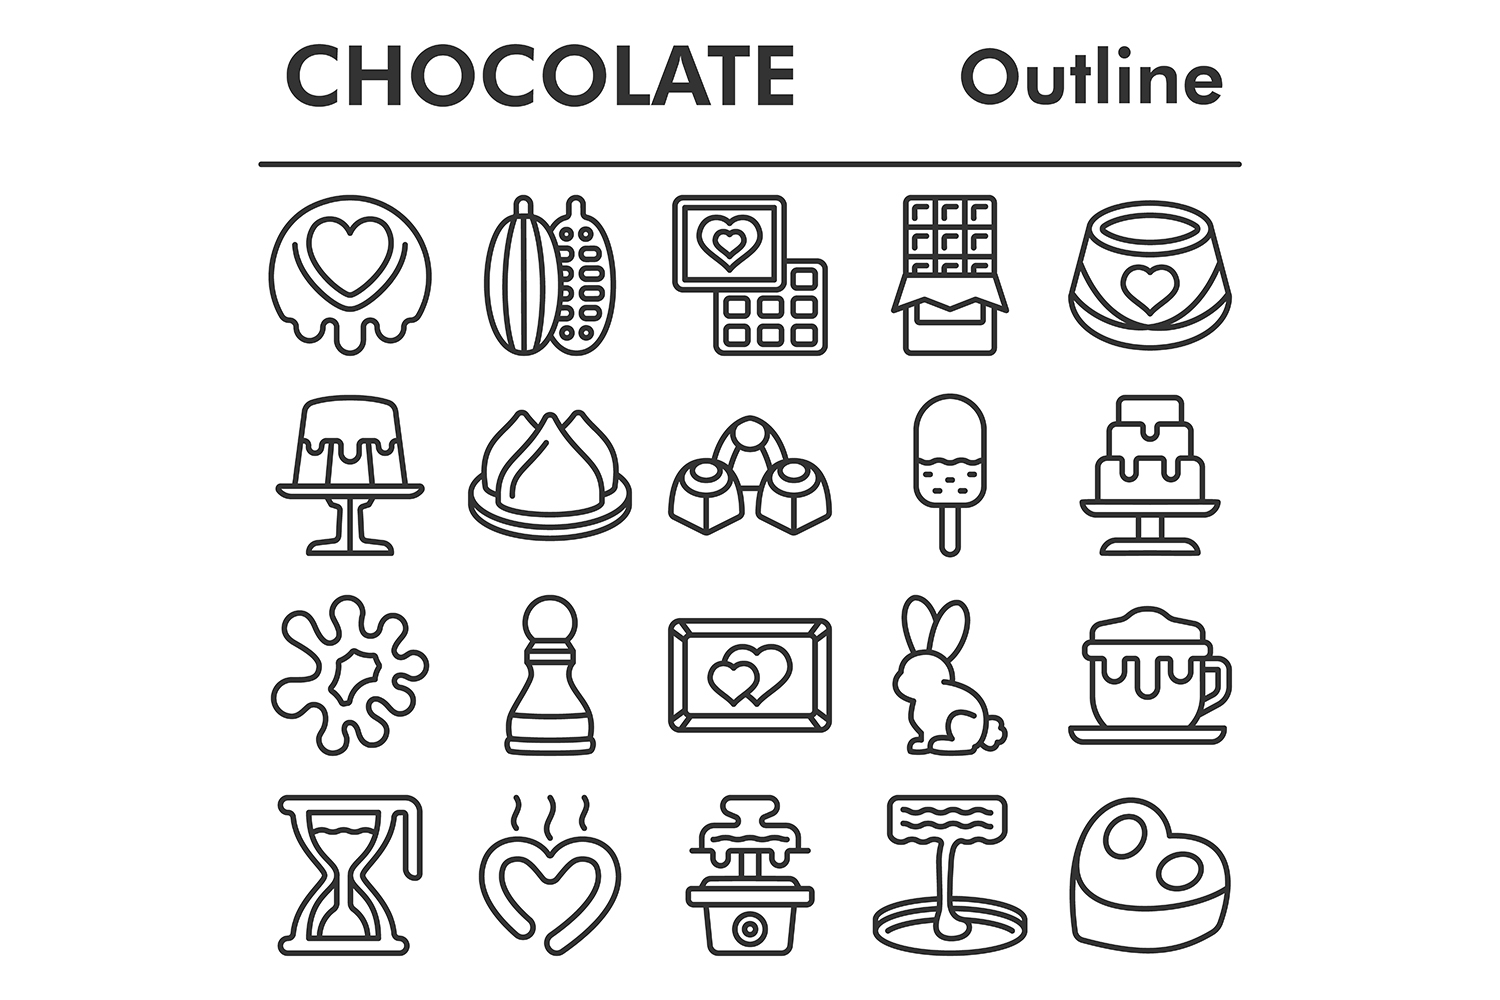 Chocolate icons set, outline style pinterest preview image.